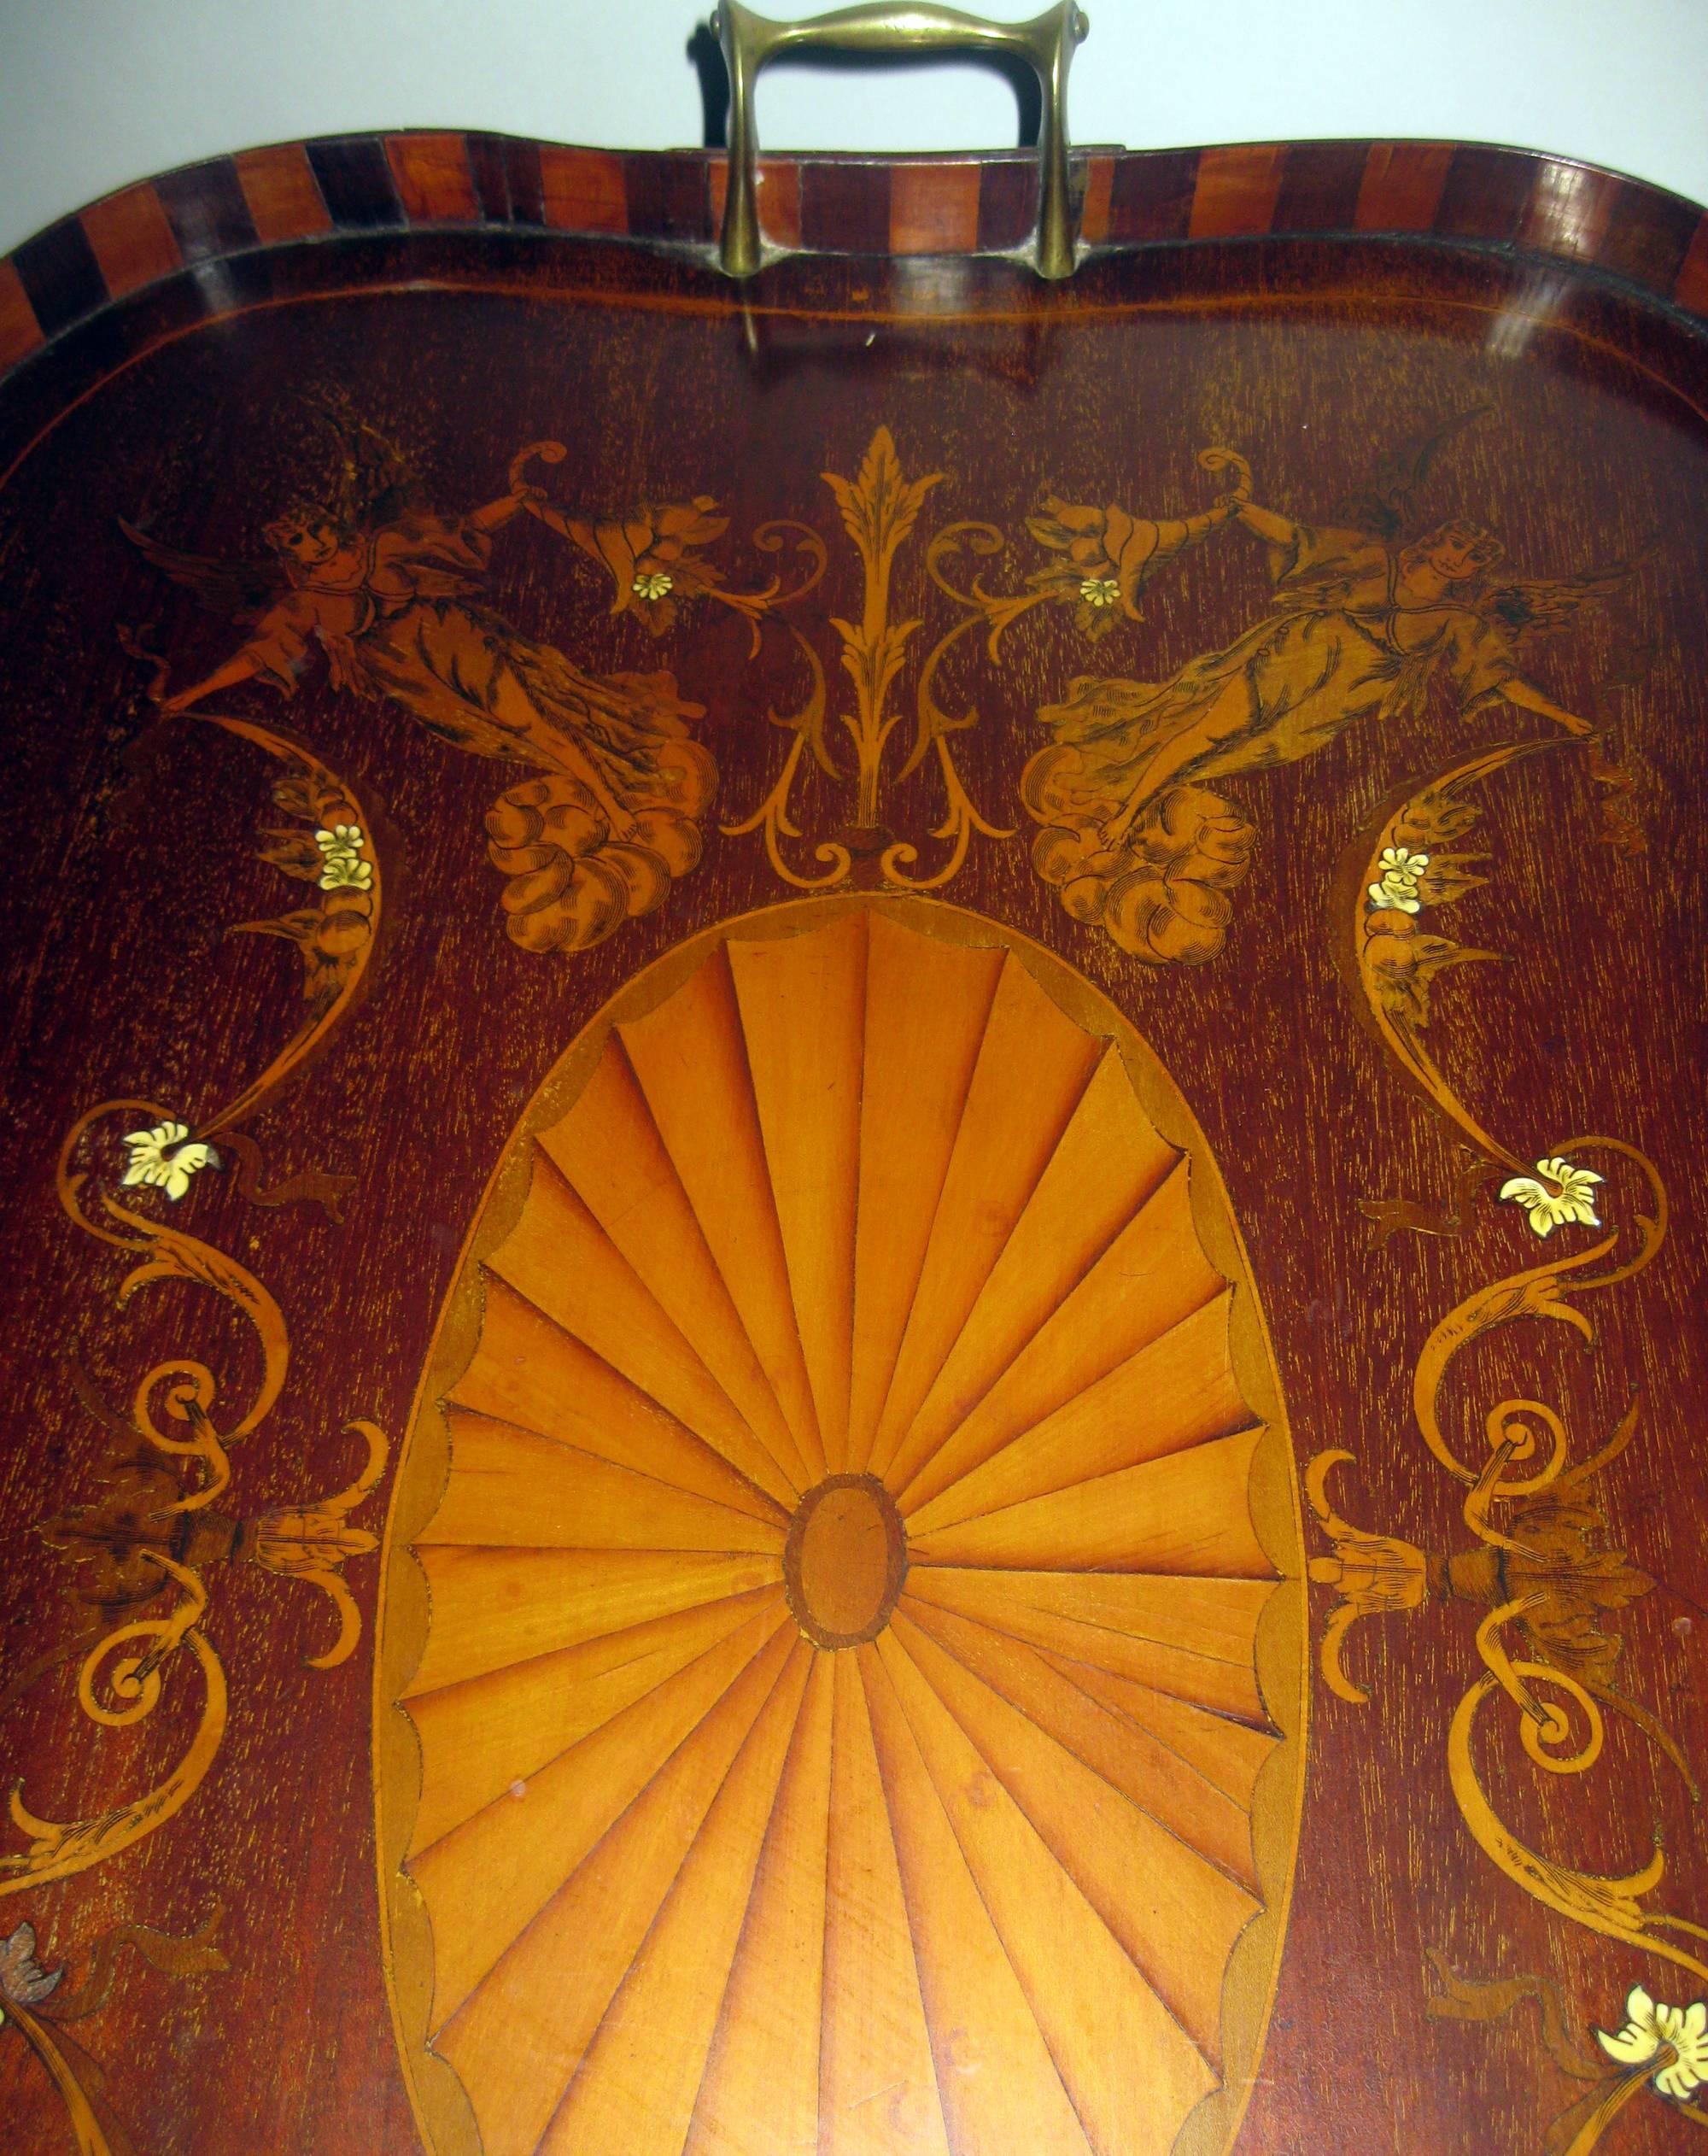 English mahogany Butler's tray with fanciful inlay and unusual curved wood gallery. Featuring four angels bearing cornucopias with scroll work around a center medallion and graceful brass handles, this fabulous one of a kind piece would make a